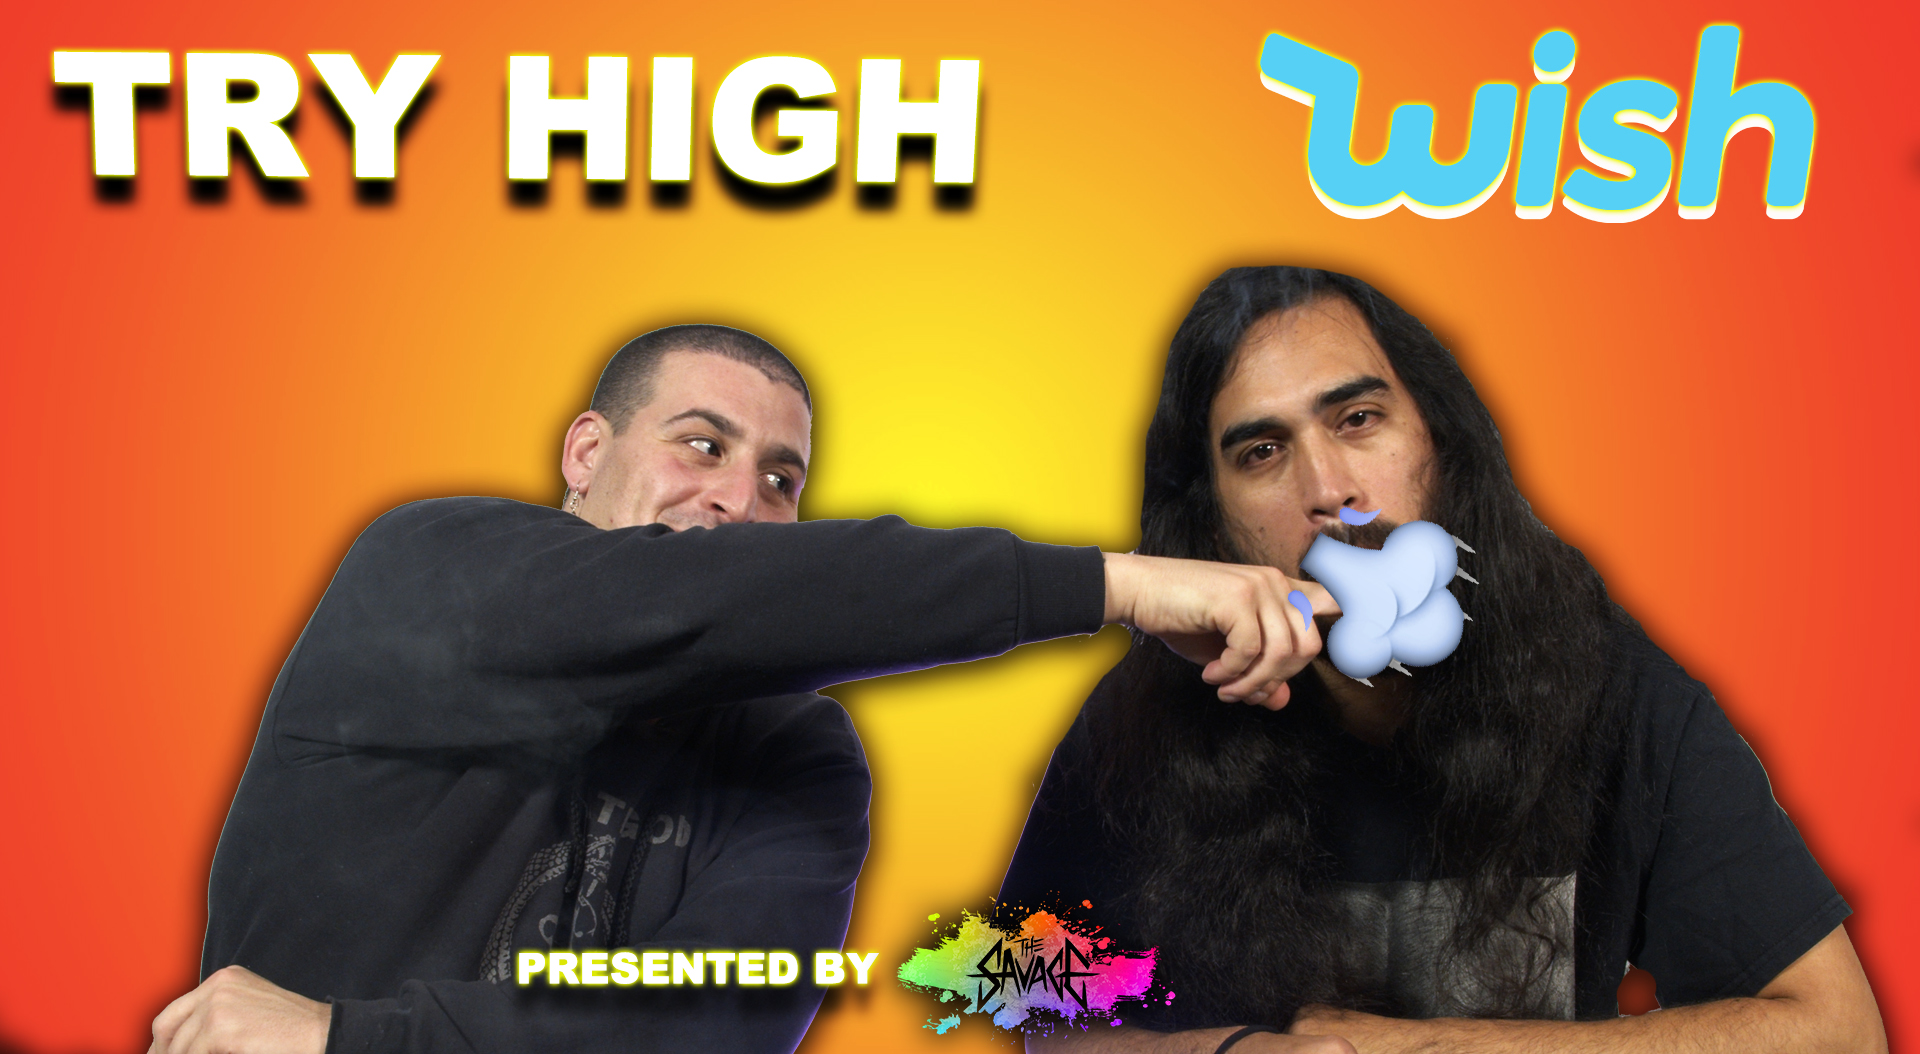 People Try a Weird Smoking Accessory from Wish | TRY HIGH